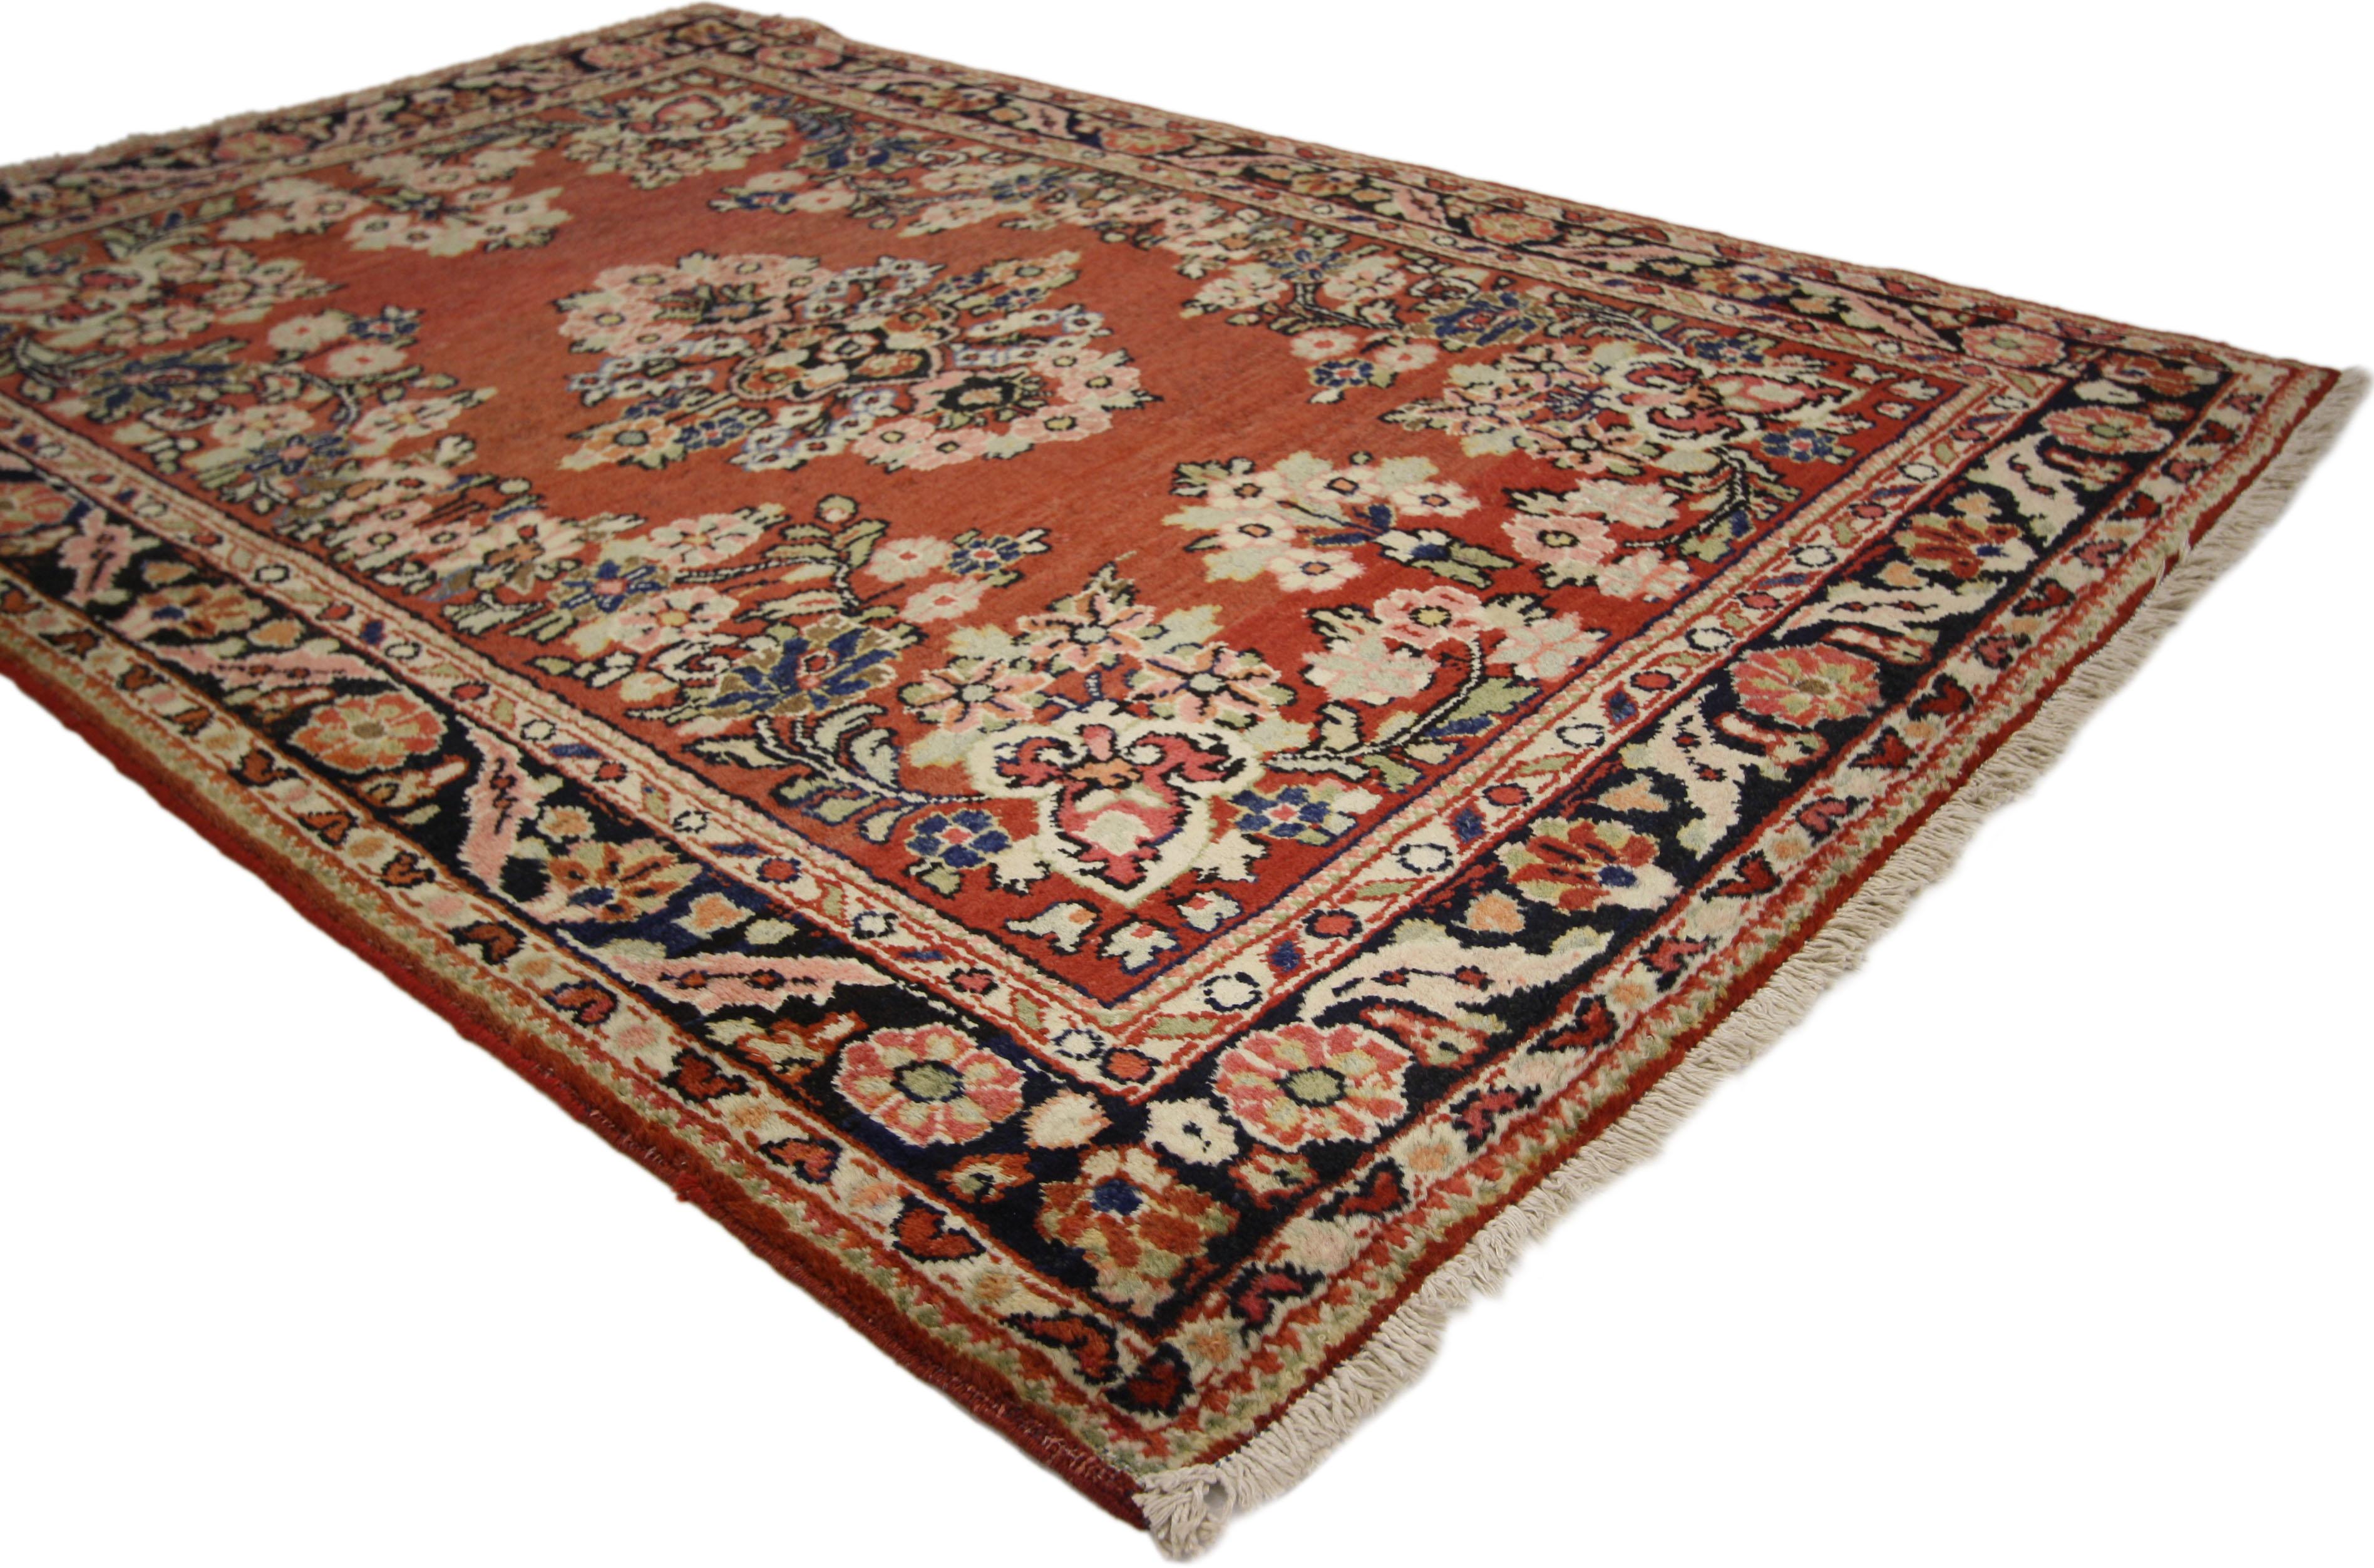 74582 Vintage Persian Mahal Rug with Rustic English Country Cottage Style 04'07 x 06'06. Boasting a floral bounty in a range of warm hues, this vintage Persian Mahal rug is a delightful example of English Country Cottage style. At the center of the